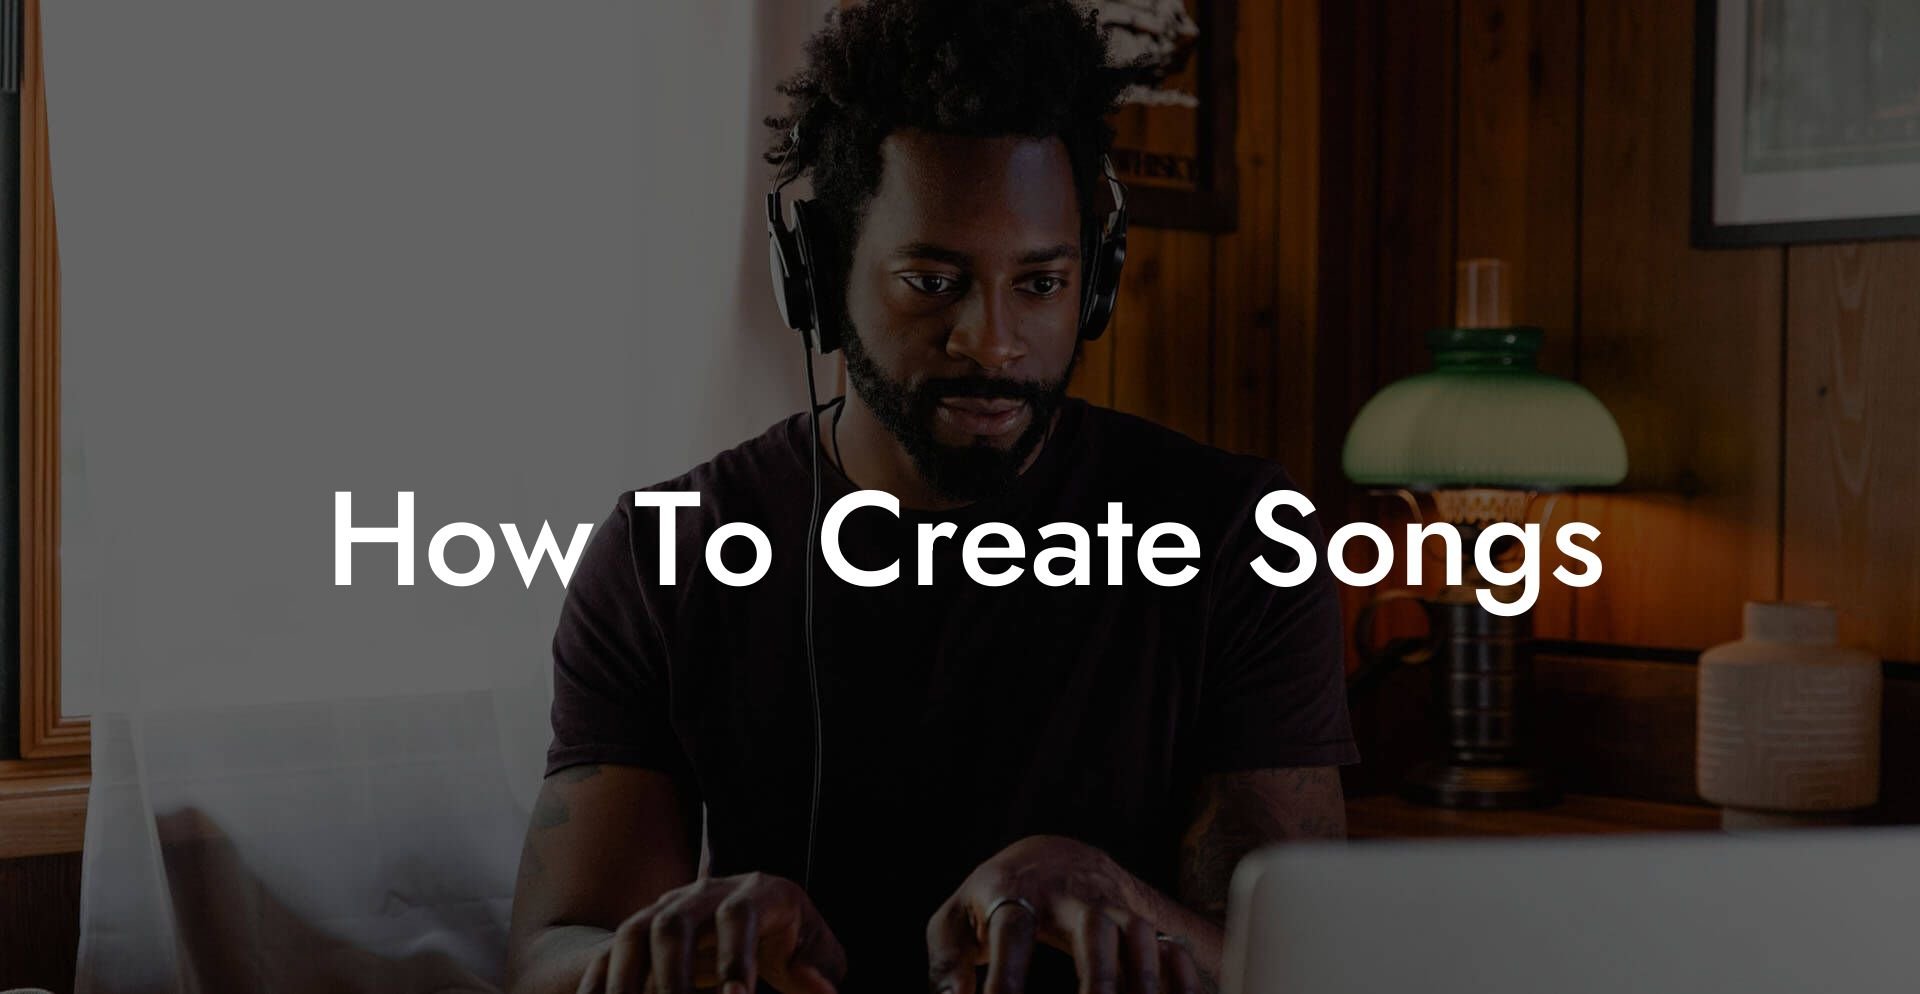 how to create songs lyric assistant